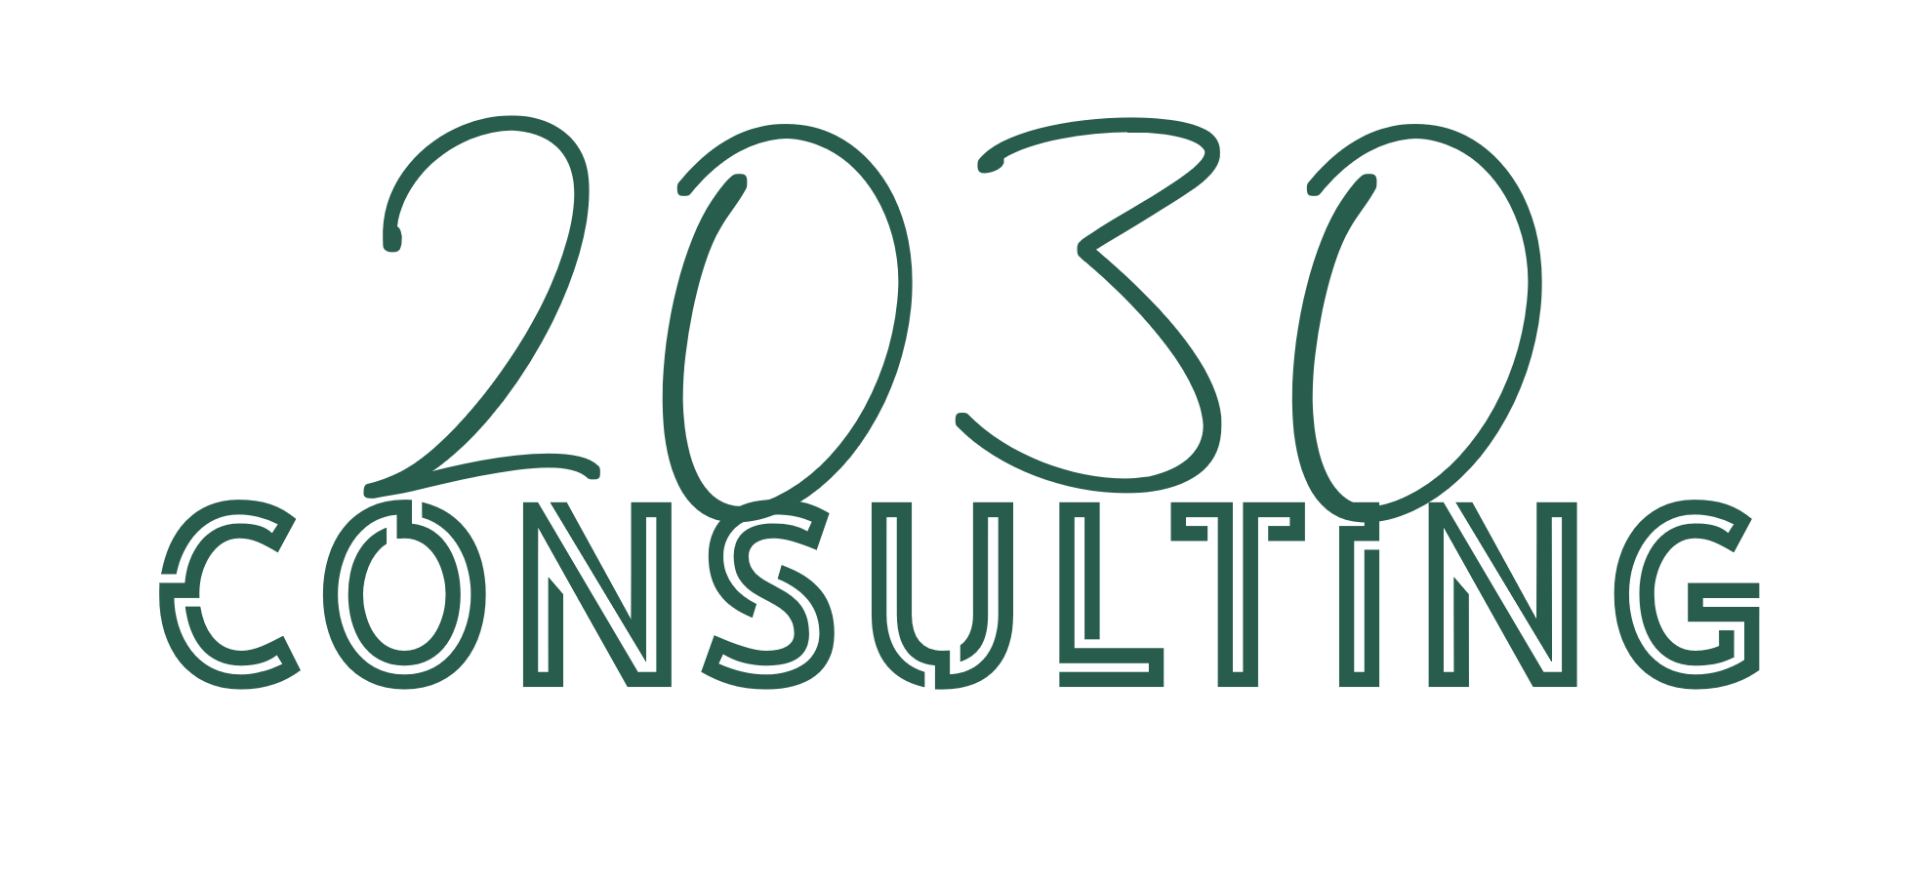 2030 Consulting